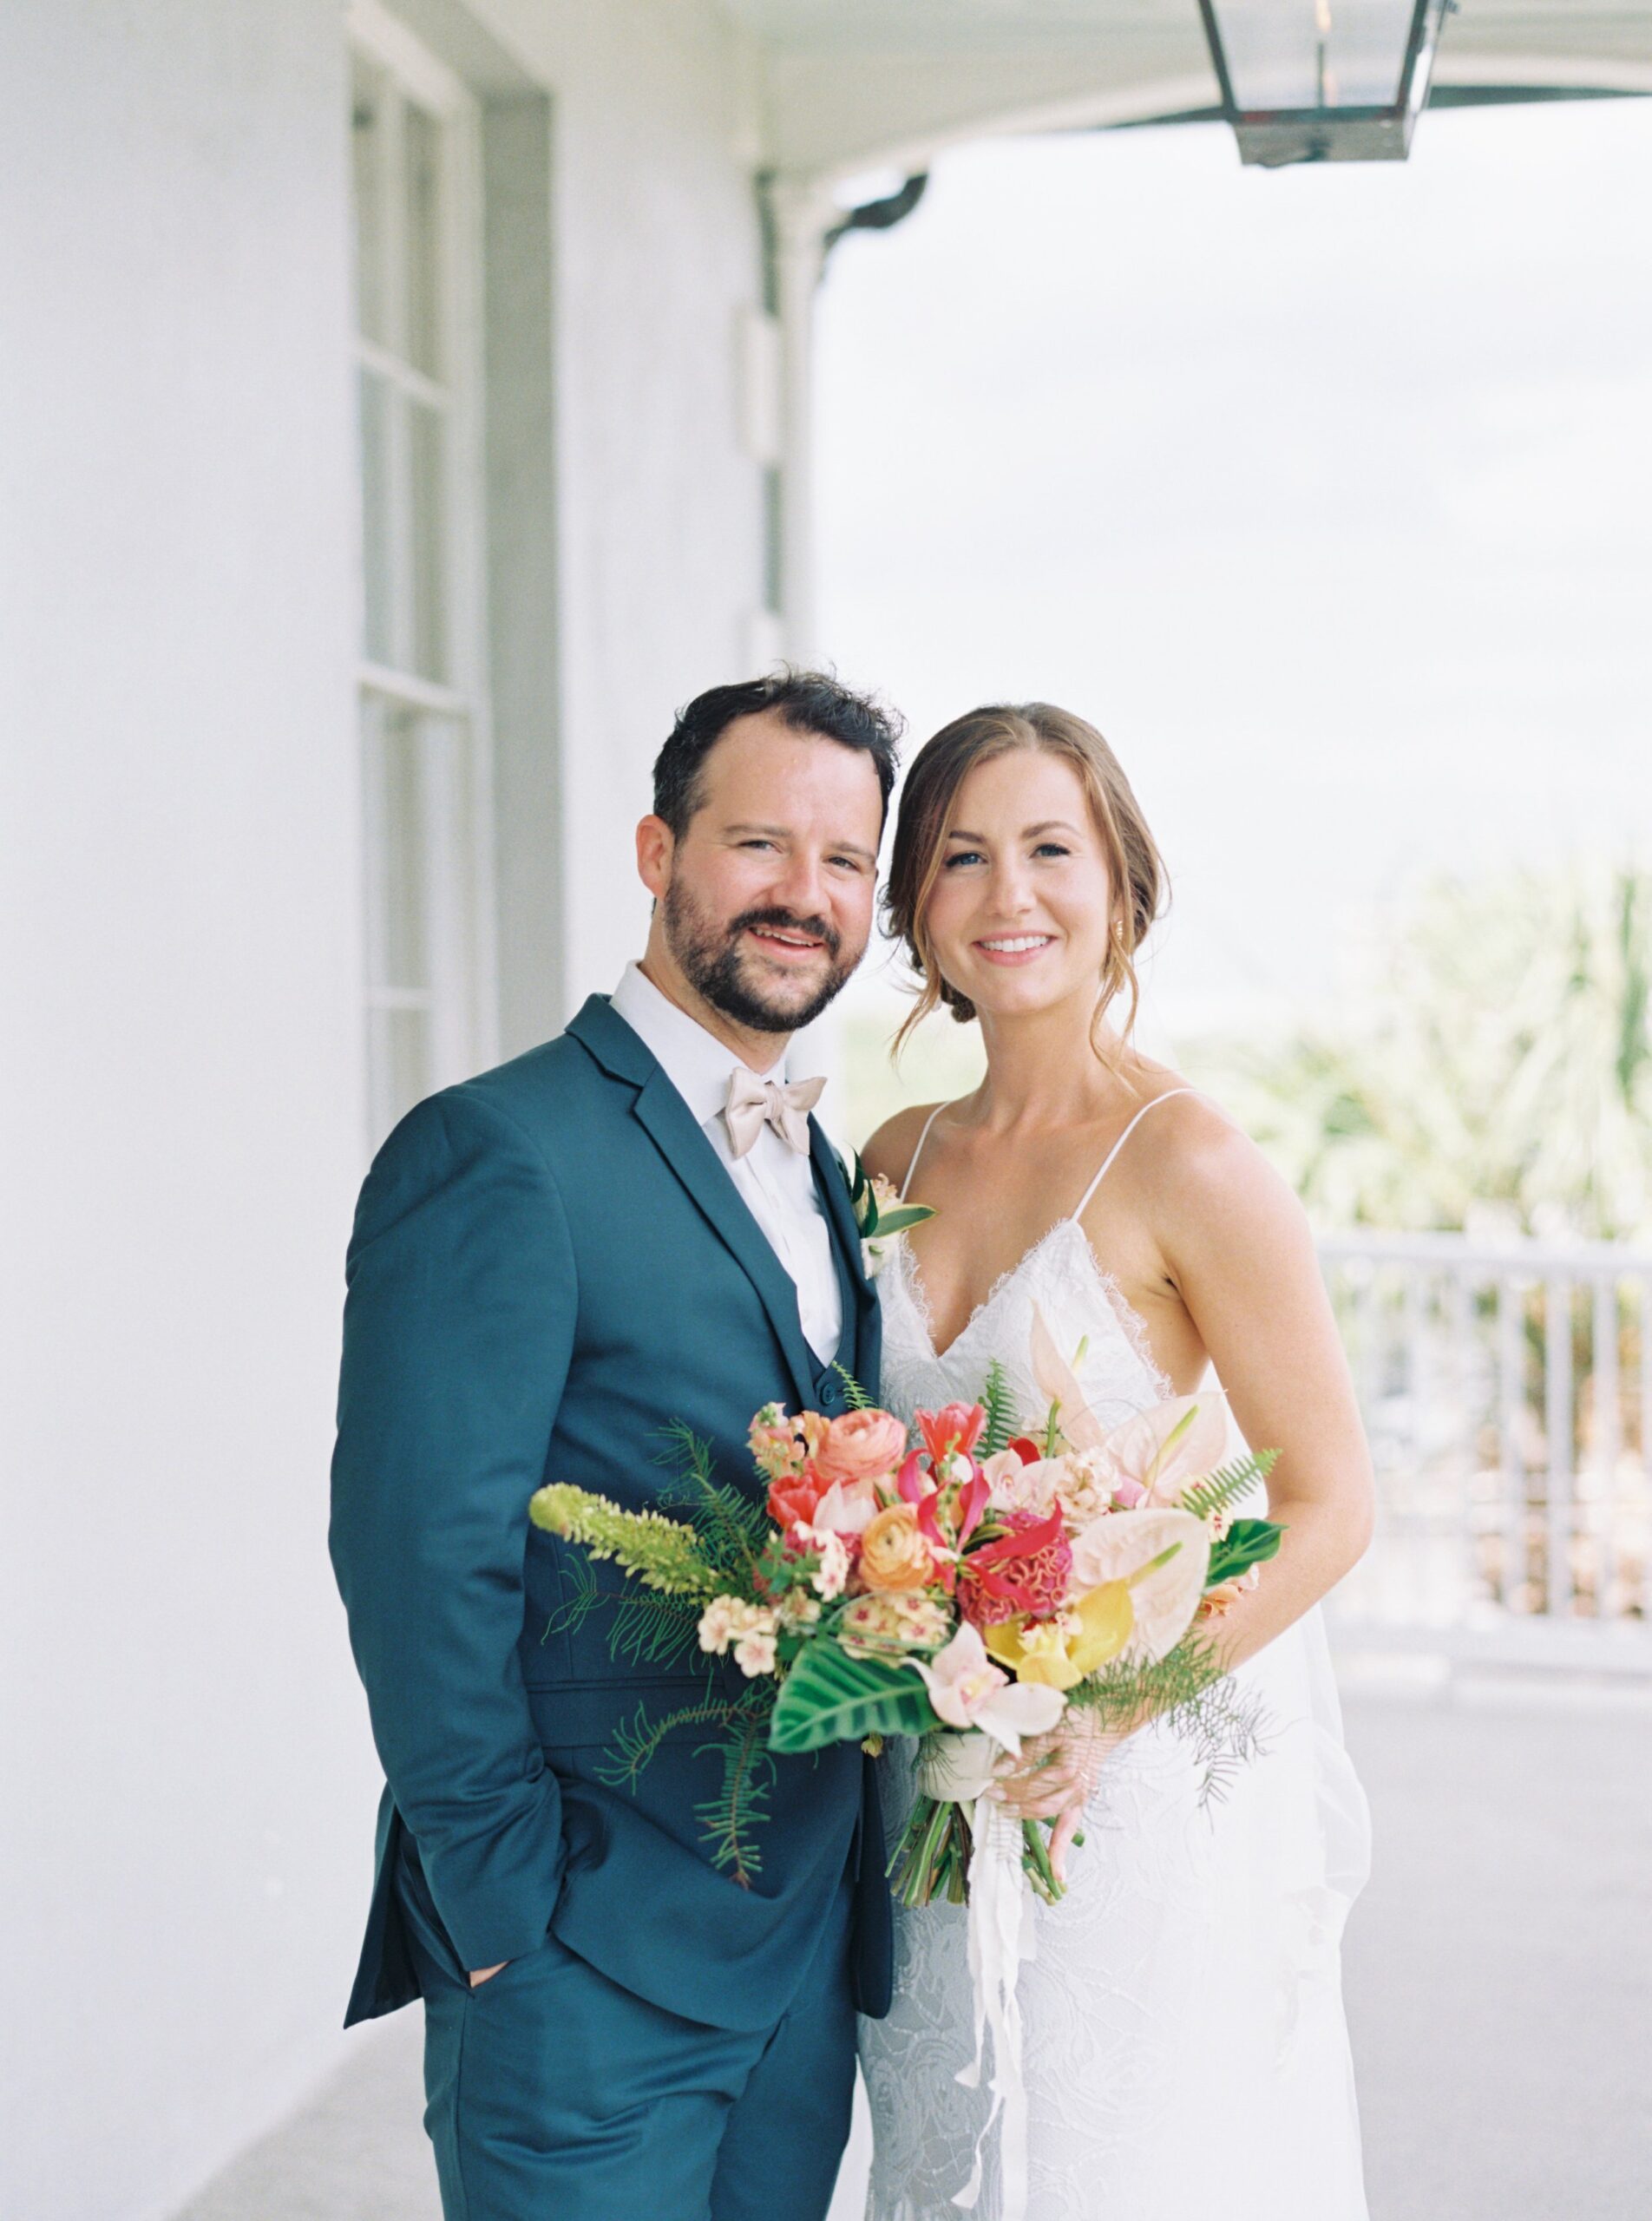 Charleston spring bride and groom. Tropical bridal flowers and groom in three piece suit.